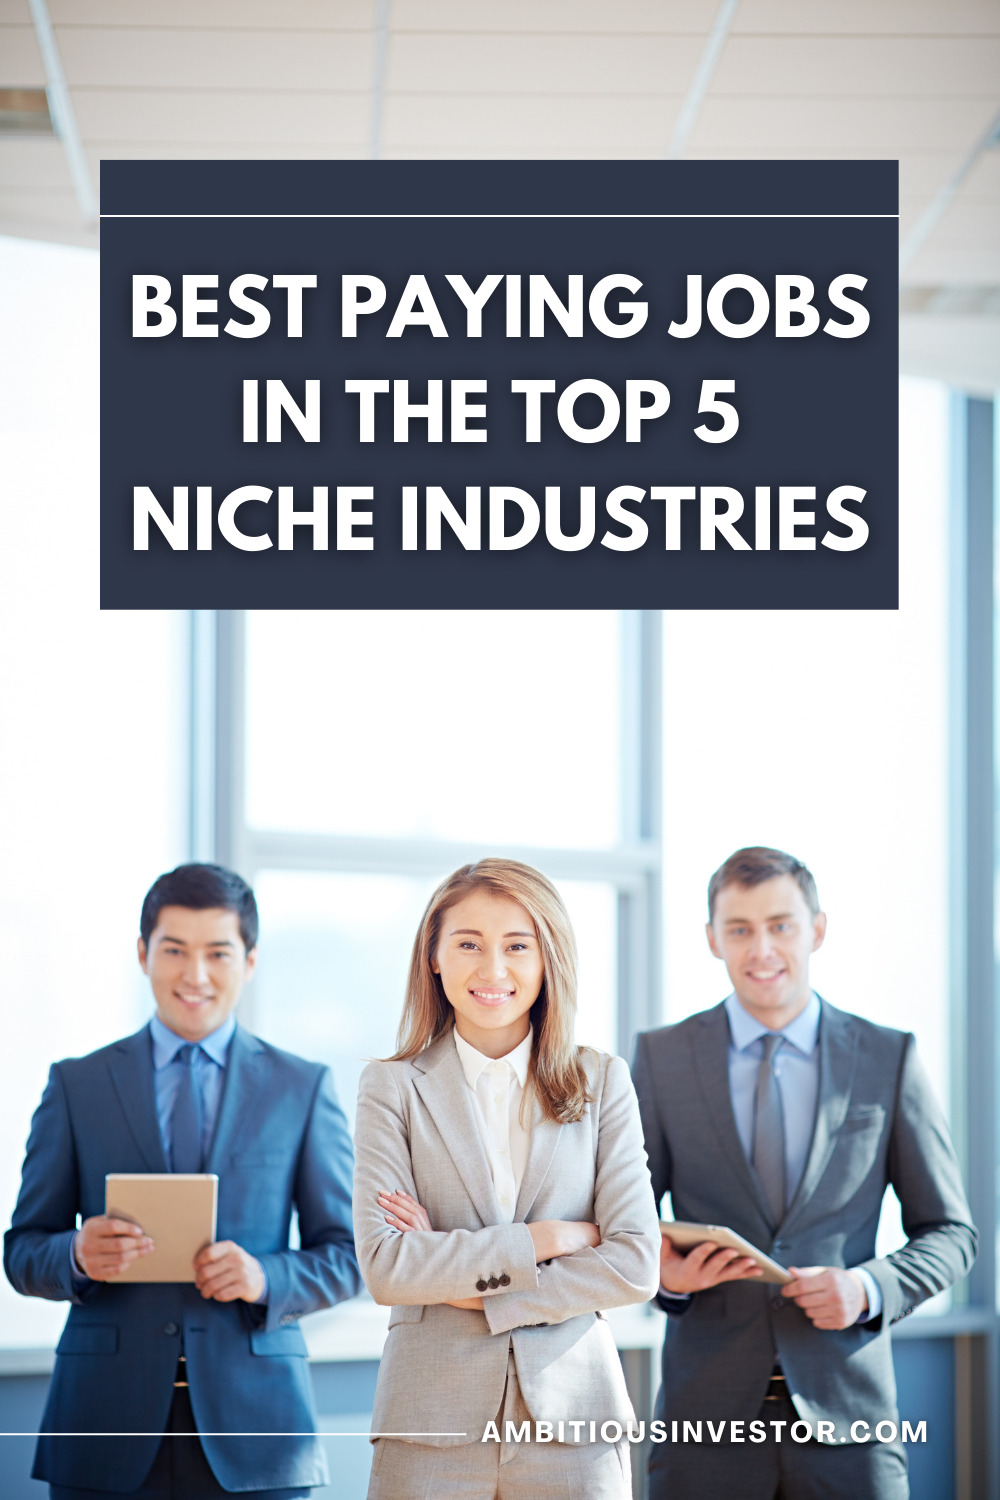 Best Paying Jobs in the Top 5 Niche Industries